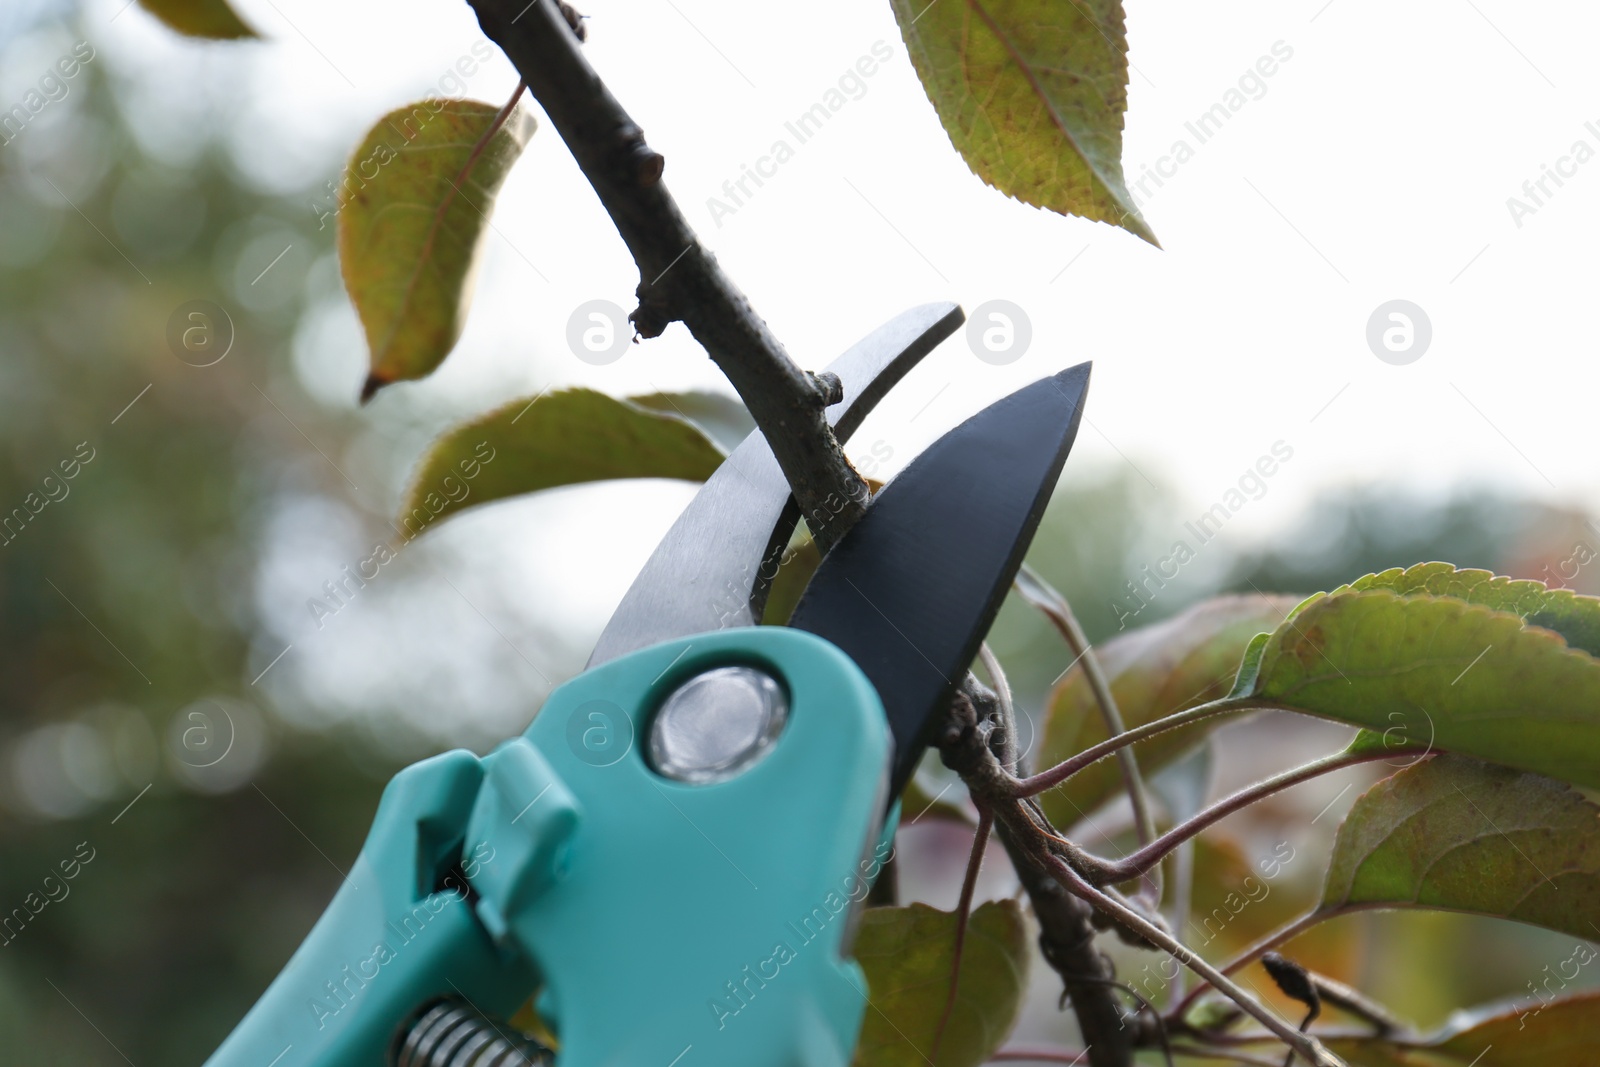 Photo of Pruning tree branch by secateurs outdoors, closeup